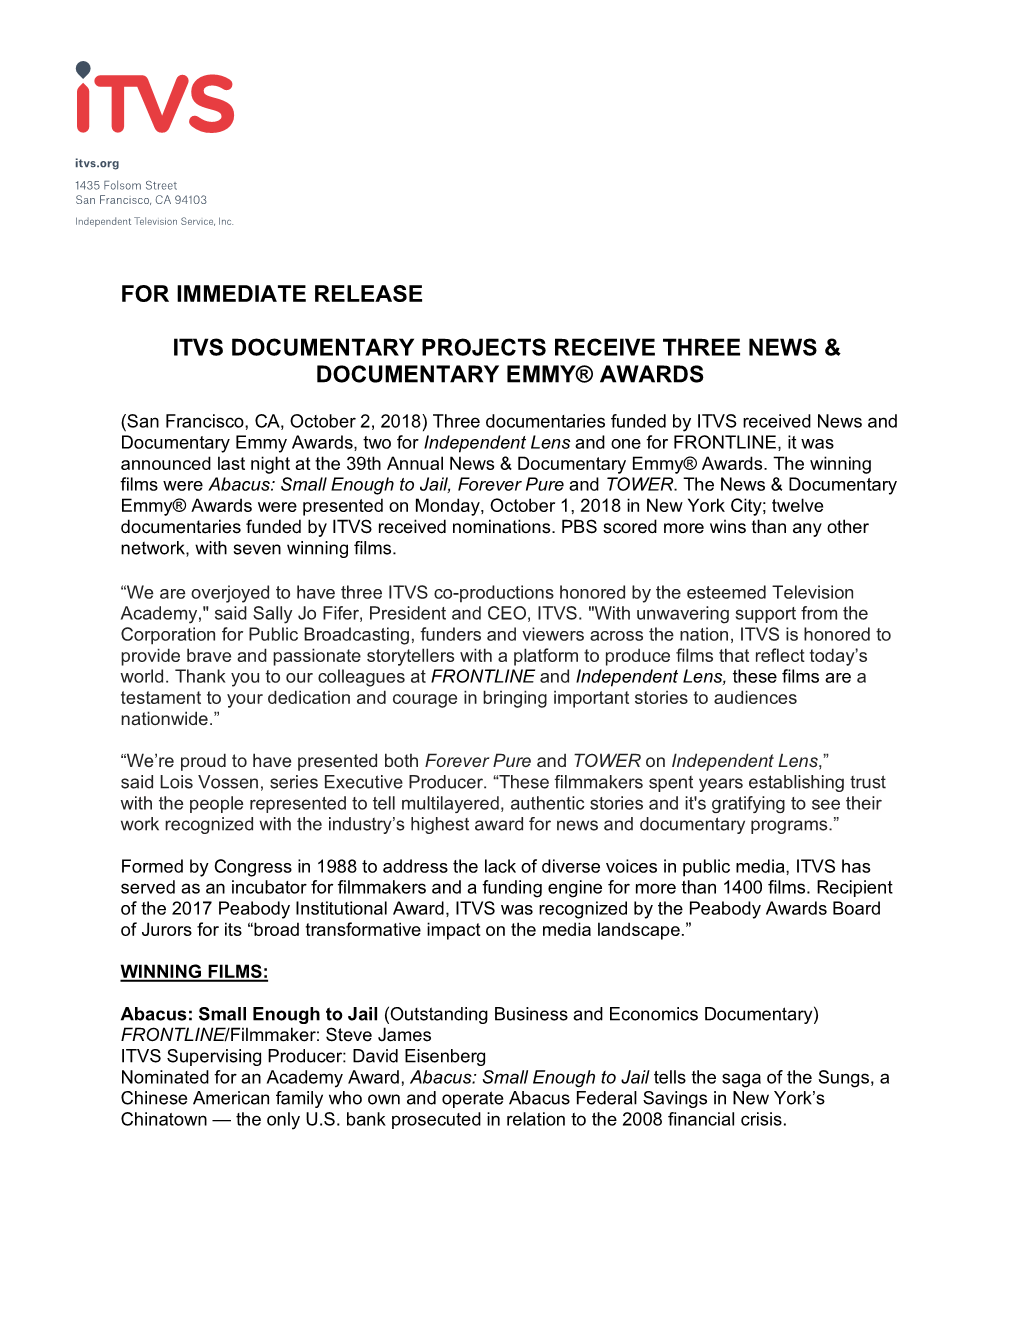 For Immediate Release Itvs Documentary Projects Receive Three News & Documentary Emmy® Awards